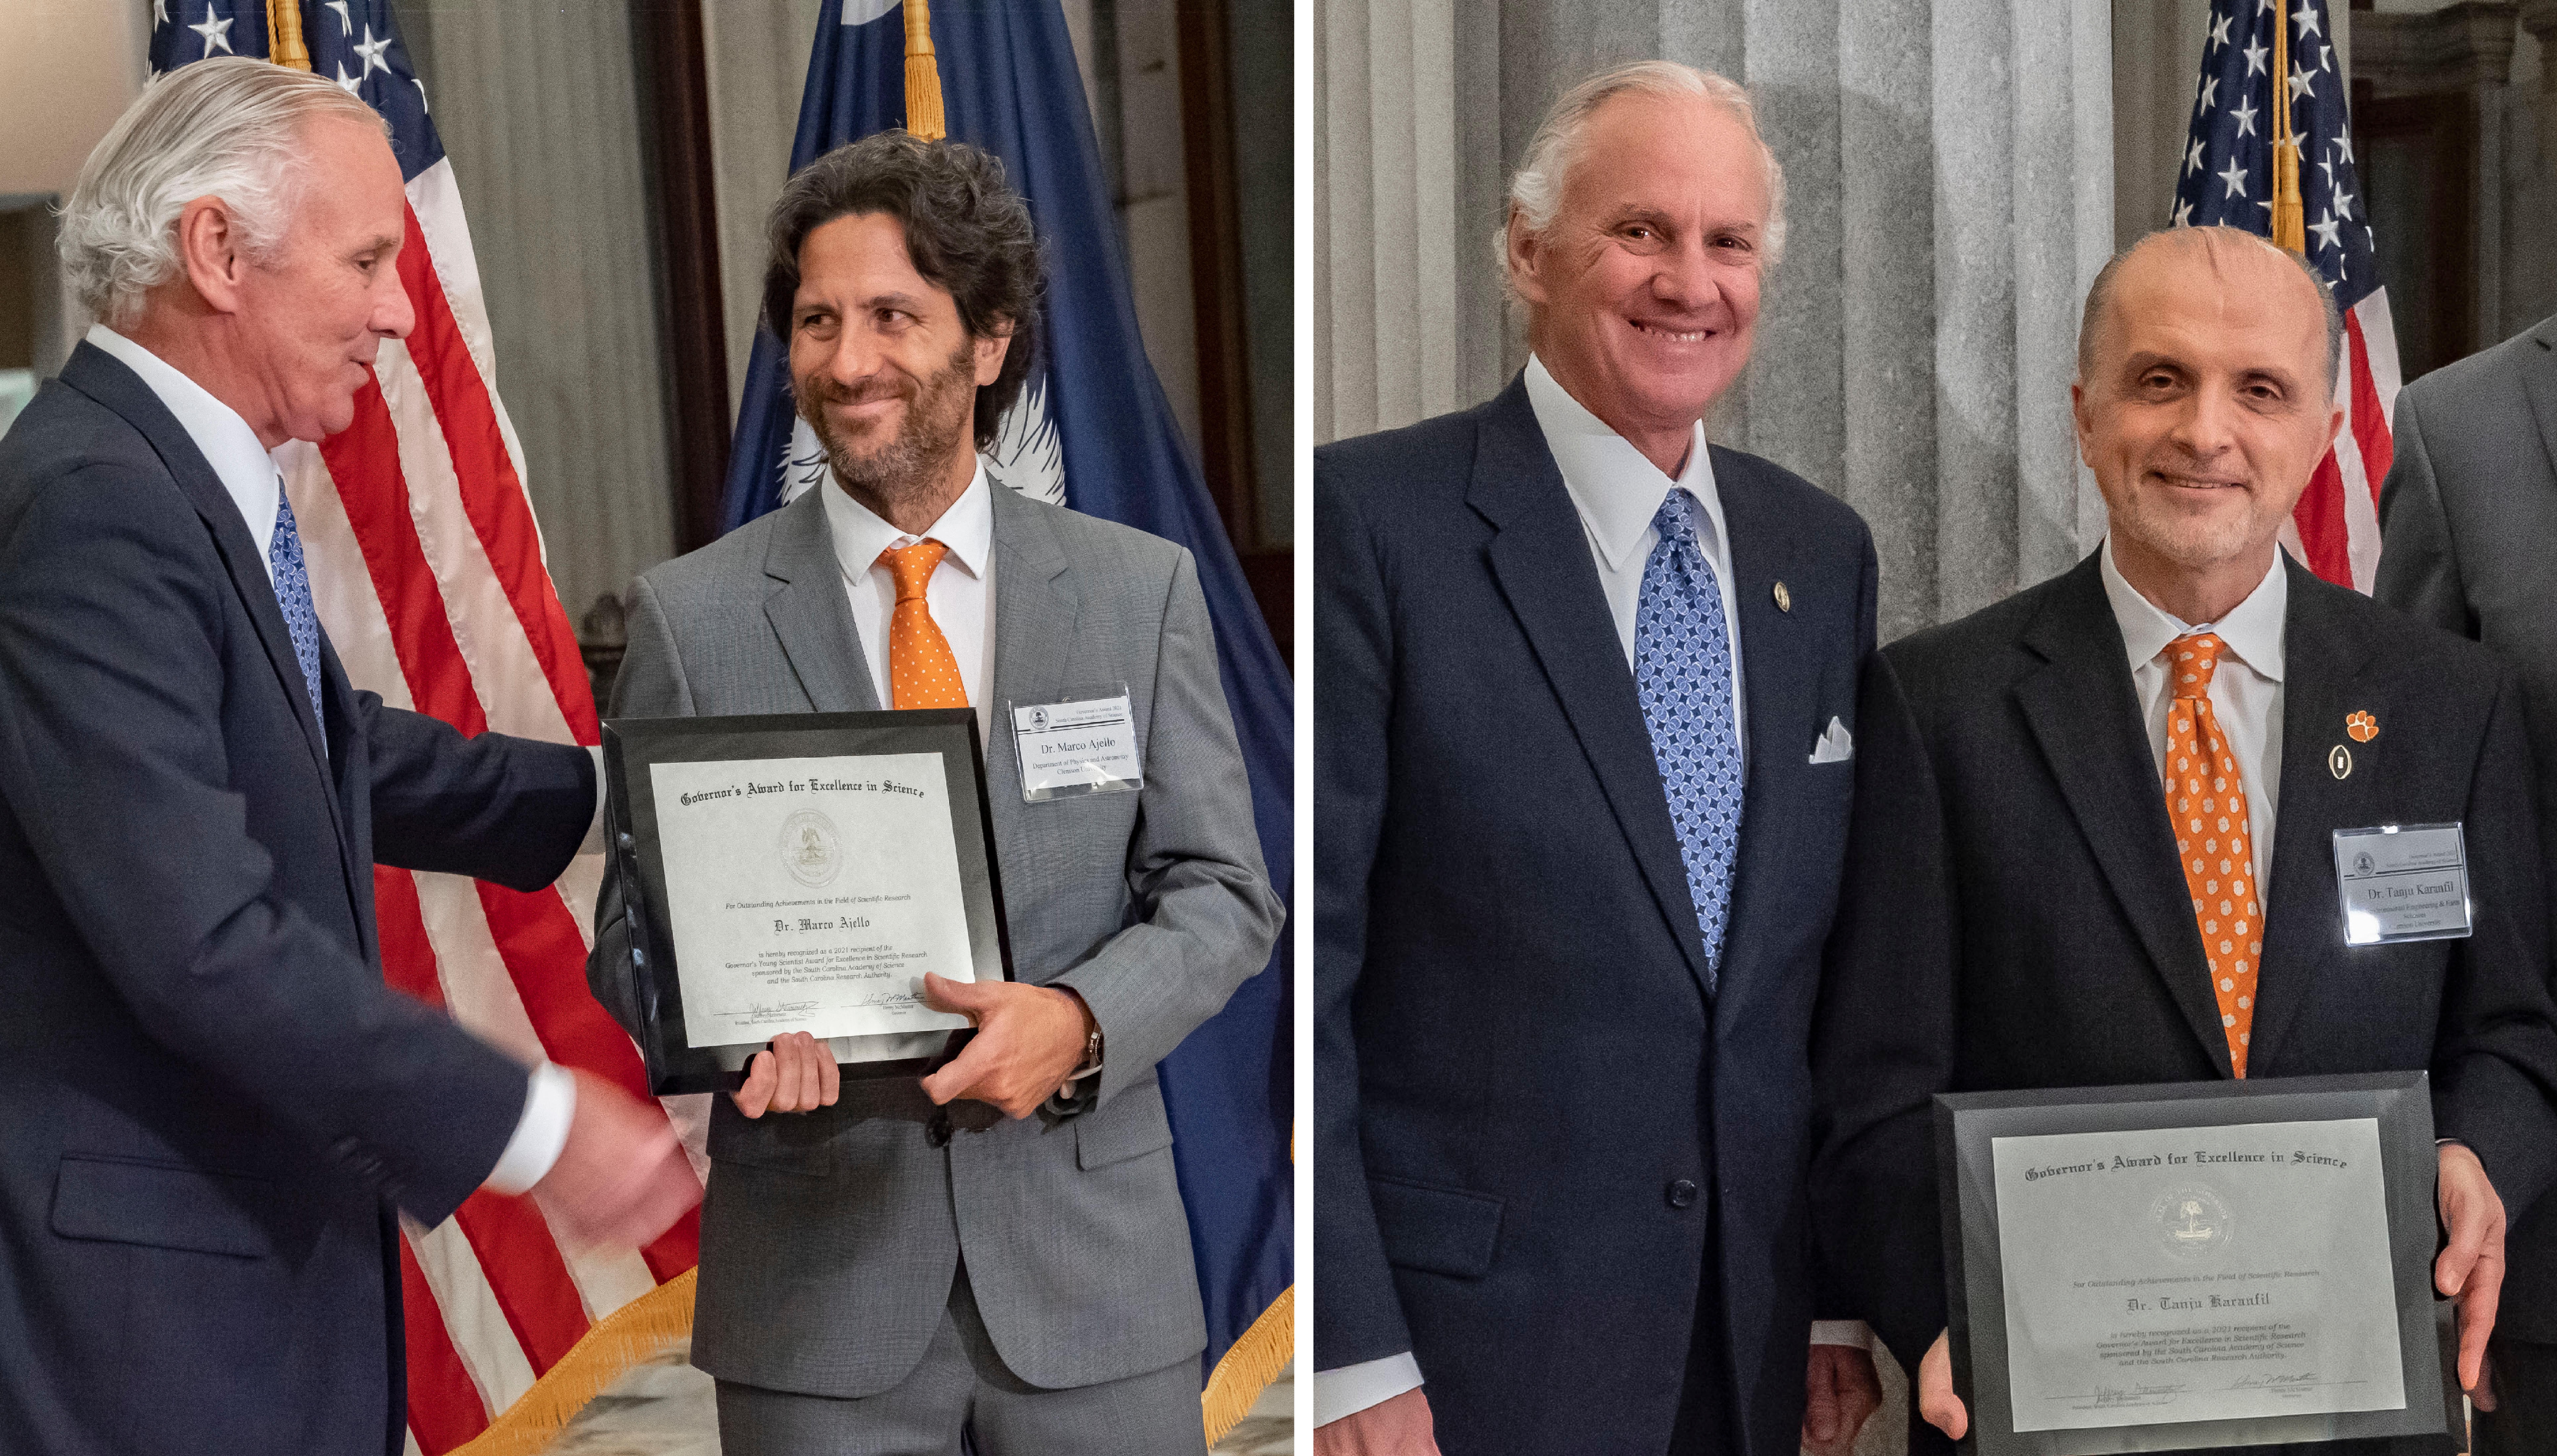 The image shows two images placed together. One is Gov. Henry McMaster with Marco Ajello of Clemson. The second is McMaster with Tanju Karanfil of Clemson and Bob Quinn of the South Carolina Research Authority.